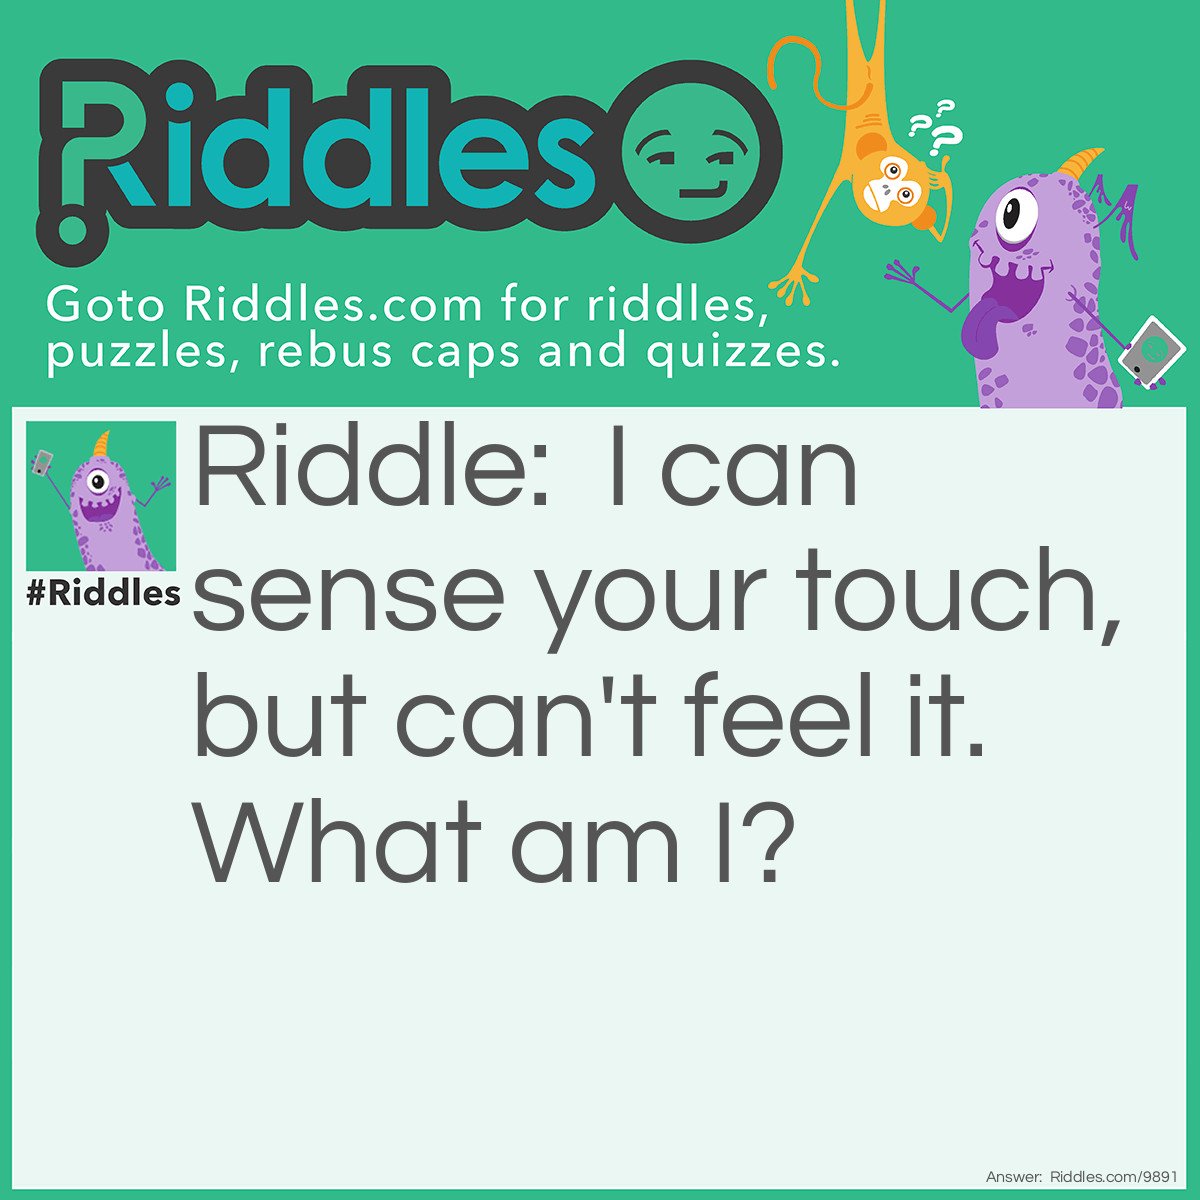 Riddle: I can sense your touch, but can't feel it. What am I? Answer: A touchscreen.